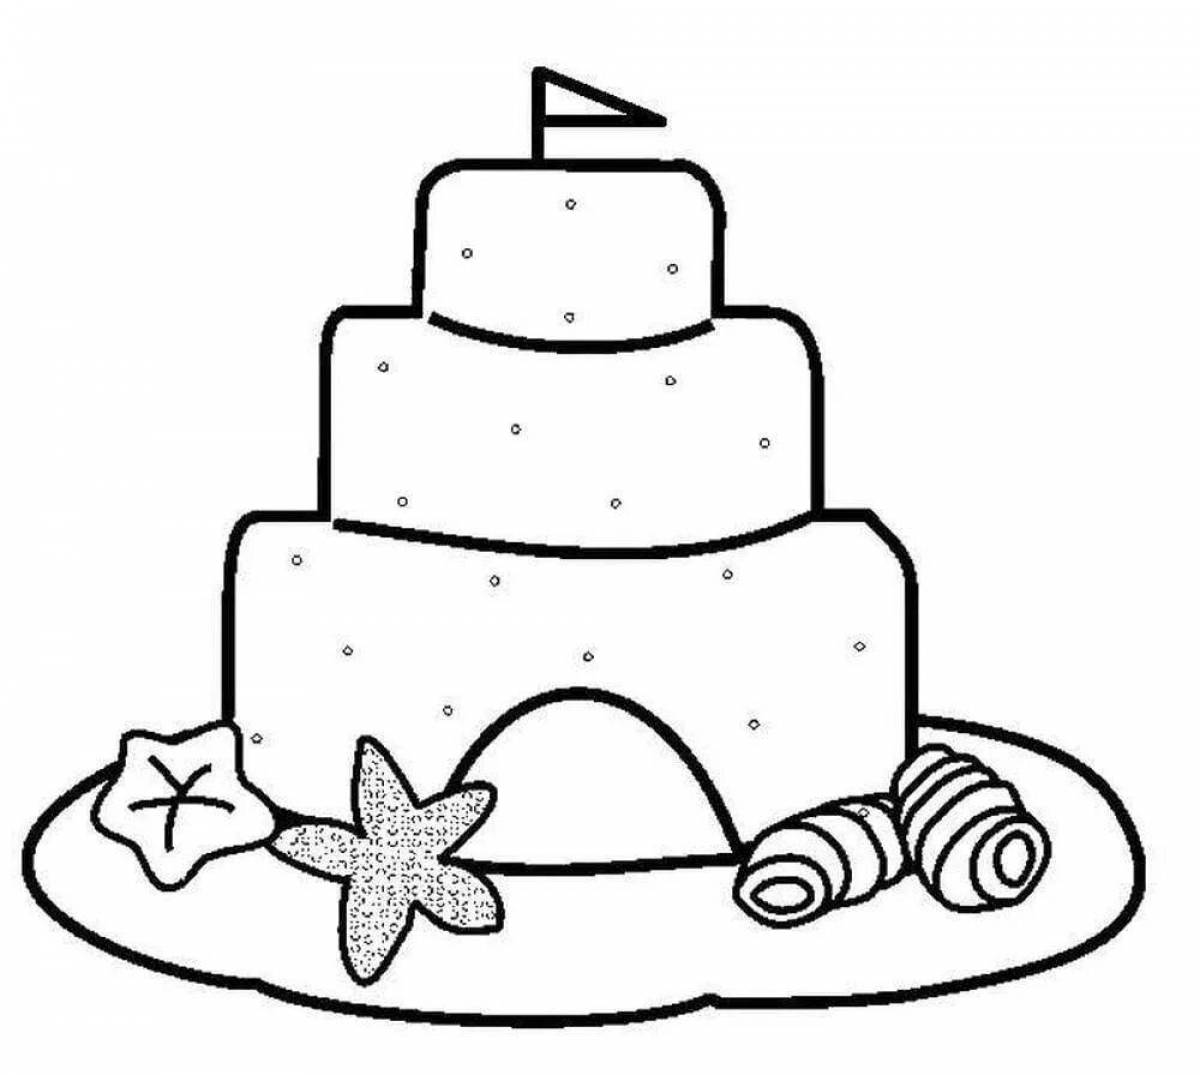 Luxury cake drawing page